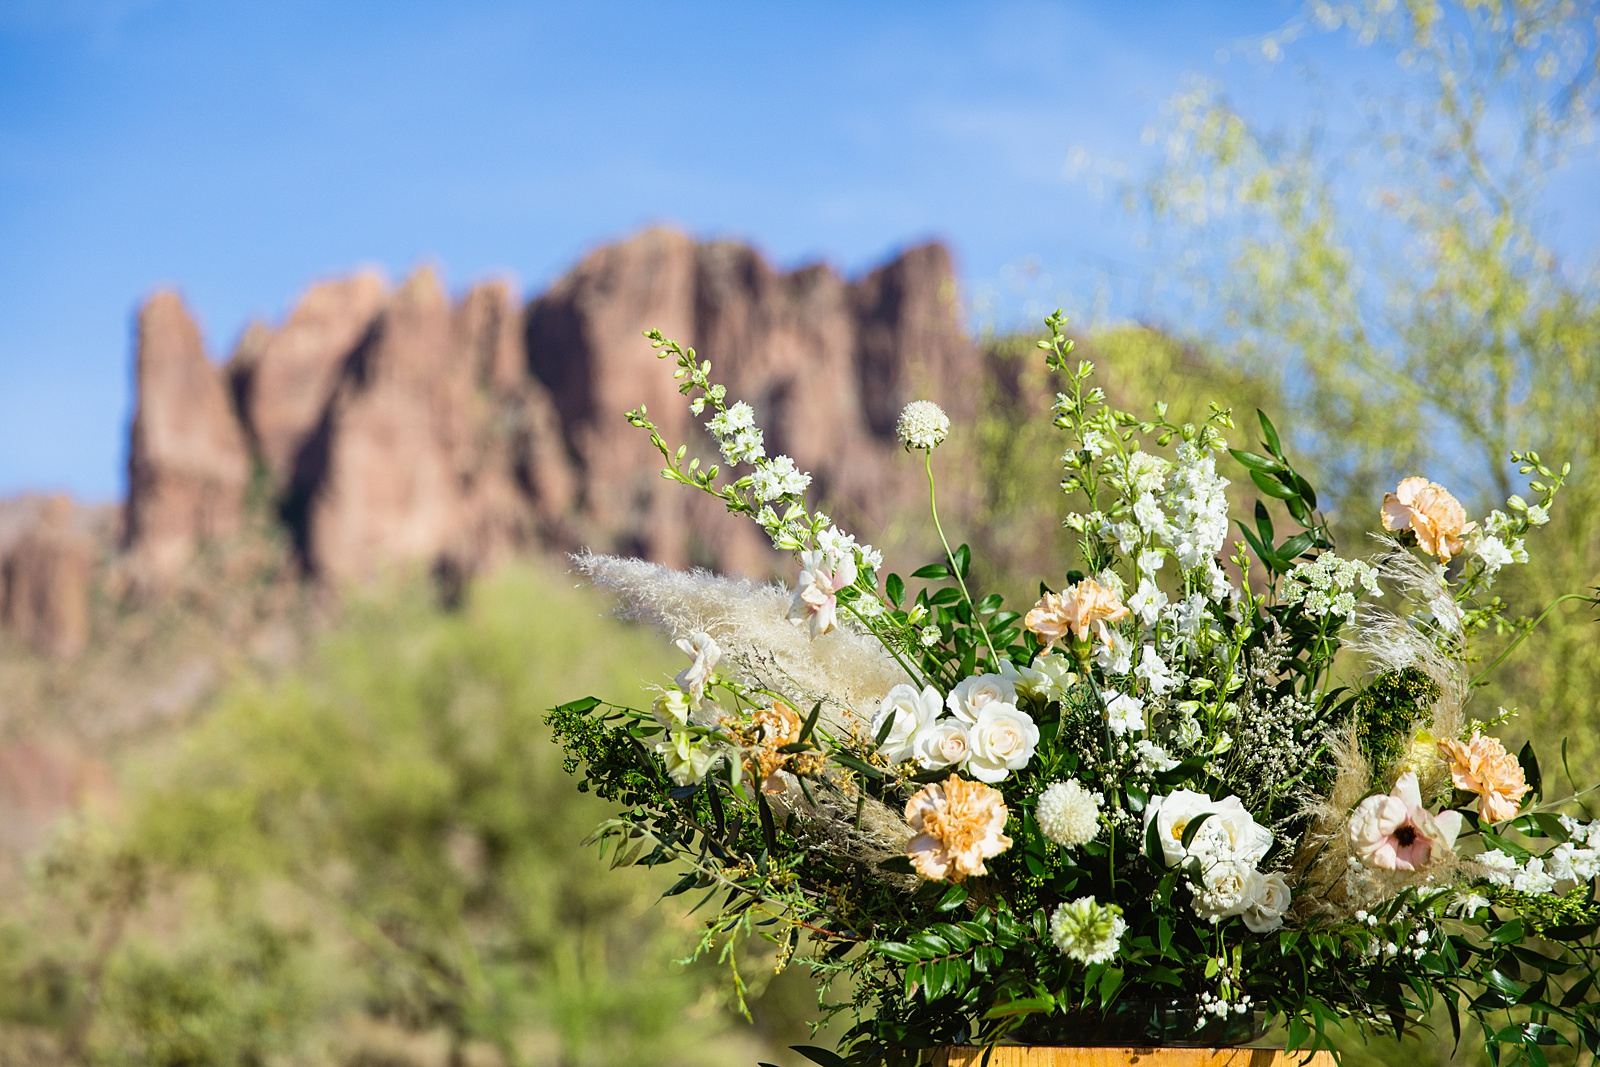 Wedding ceremony at Superstition Mountain Micro by Phoenix wedding photographer PMA Photography.